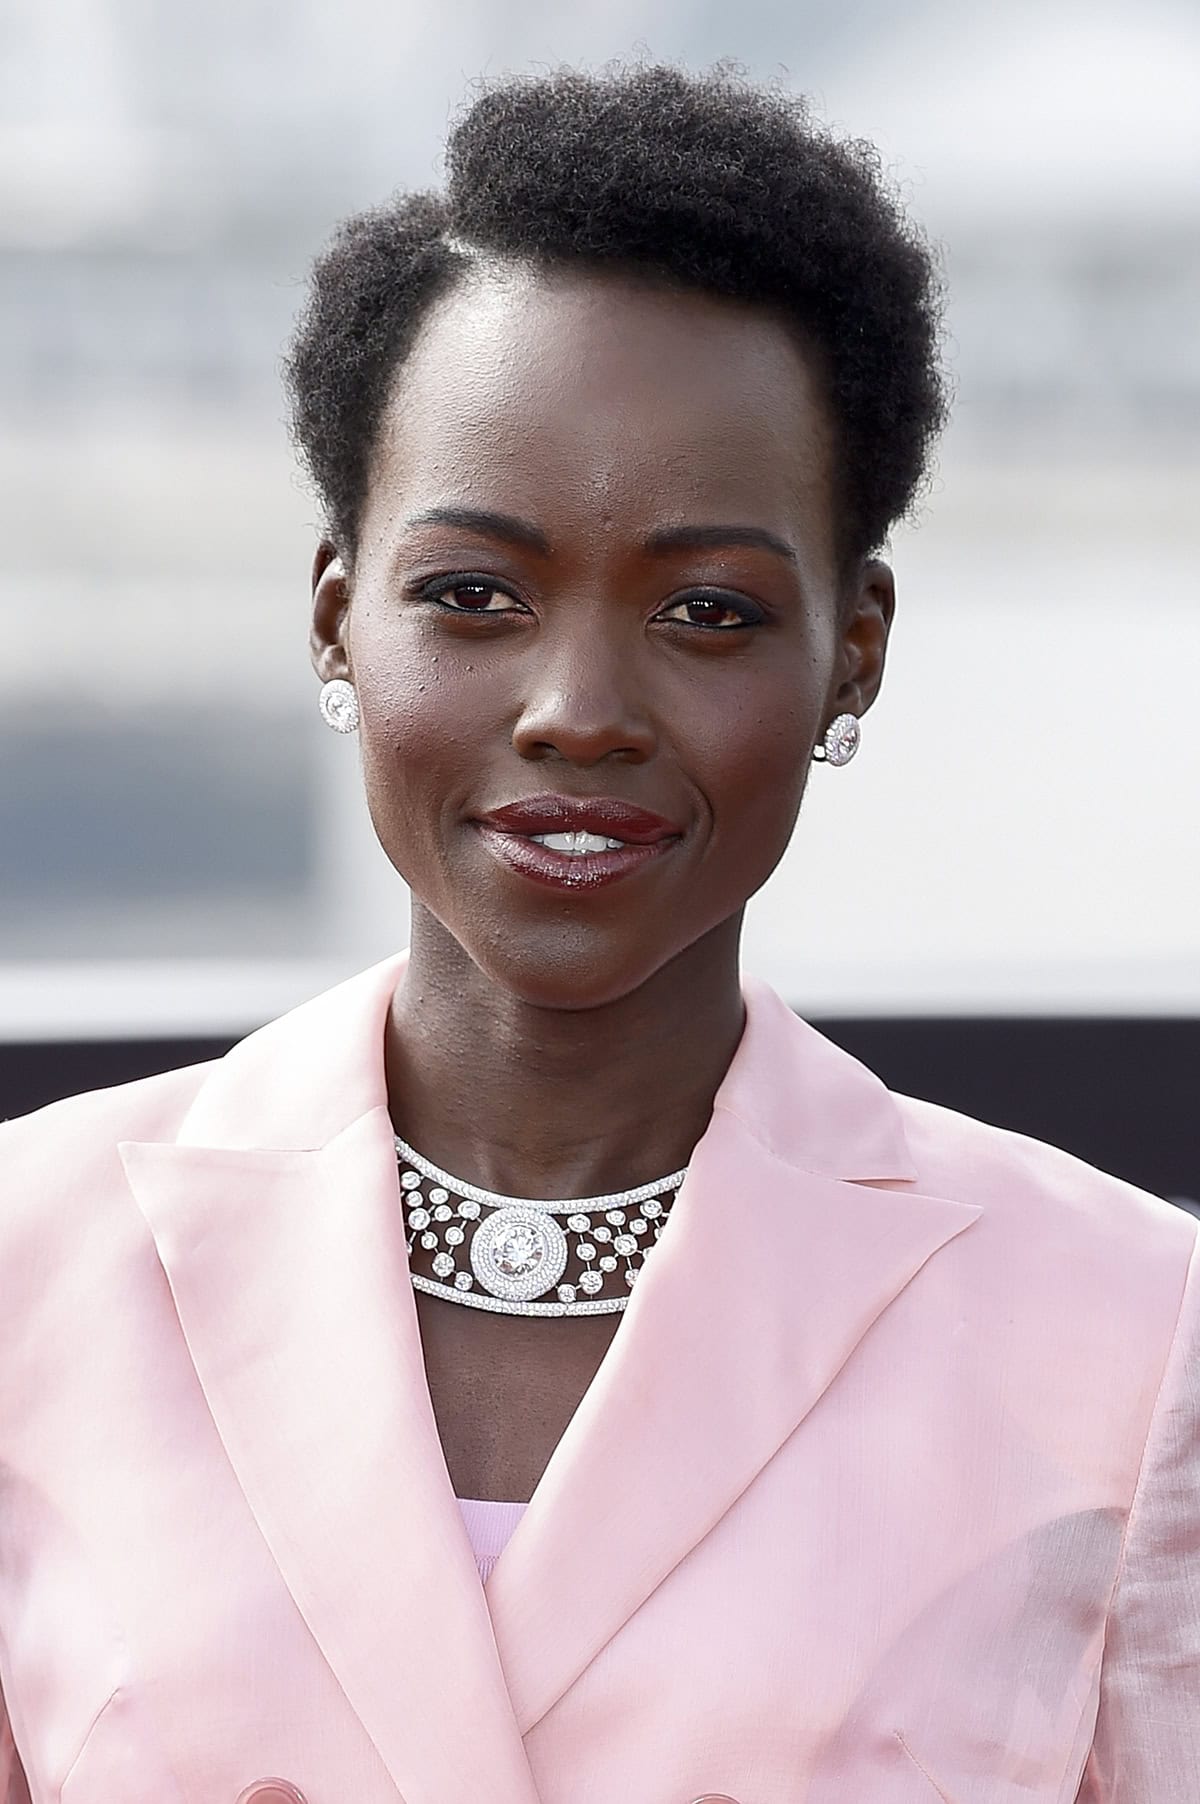 Lupita Nyong'o parts her short curly hair to the side and wears pink sorbet makeup to match her outfit